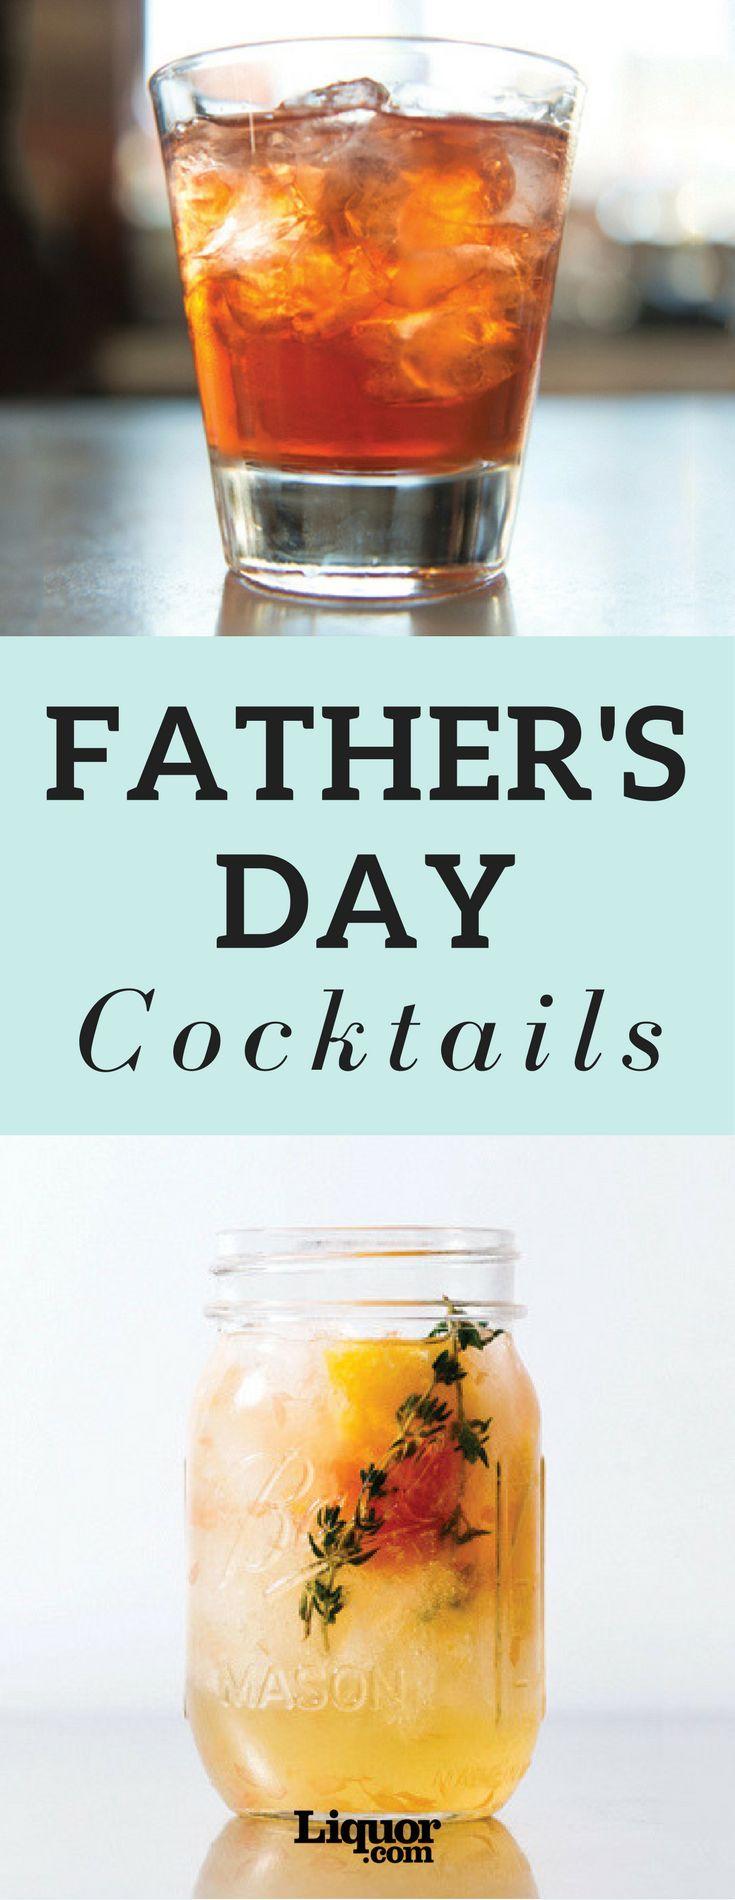 Wedding - 8 Essential Cocktails For Father’s Day